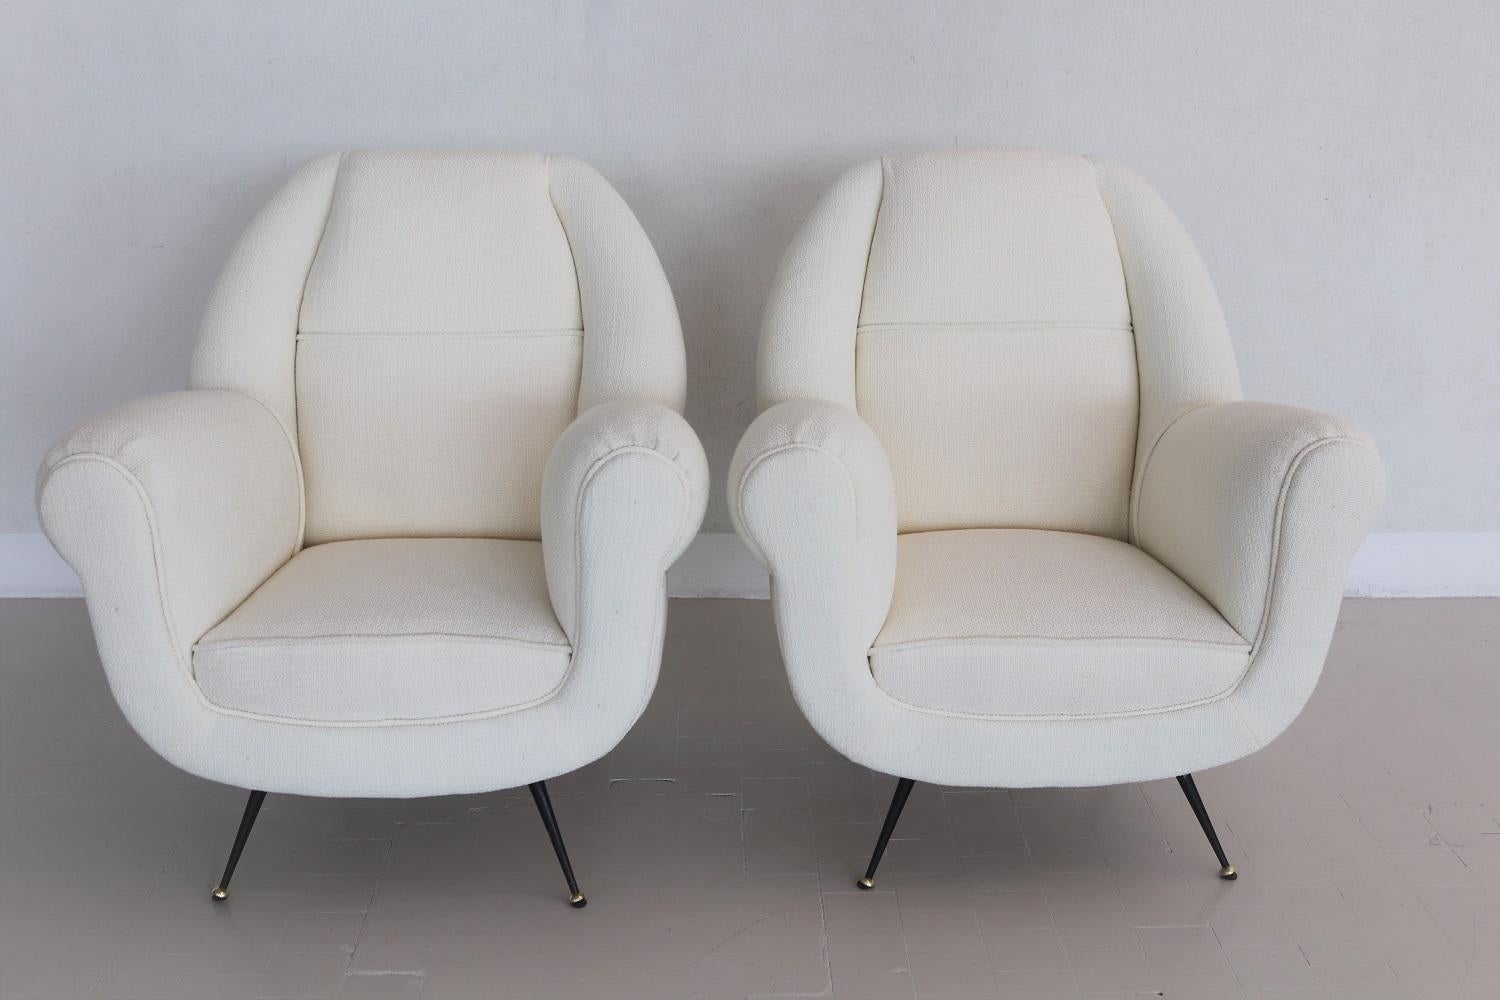 Magnificent and elegant pair of two Italian original mid-century armchairs or lounge chairs from the 1960s with brass stiletto feet.
Attributed to Design from Gigi Radice.
Completely restored internally with quality material and outside